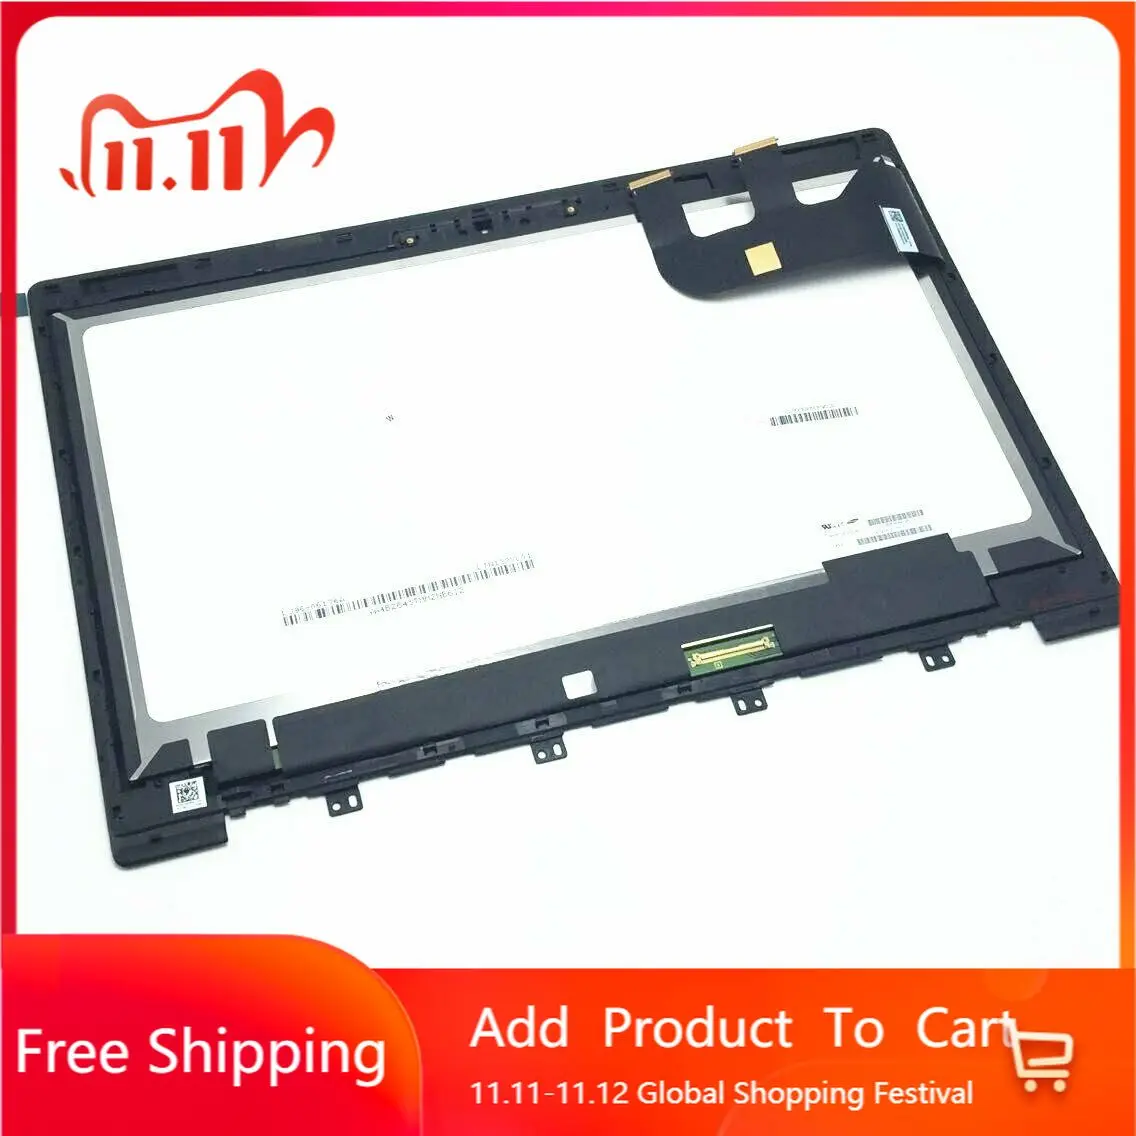 

FHD QHD LCD Screen Display Panel Touch Digitizer Glass Assembly with Bezel for Asus Zenbook UX303 UX303U UX303UA UX303UB UX303LN